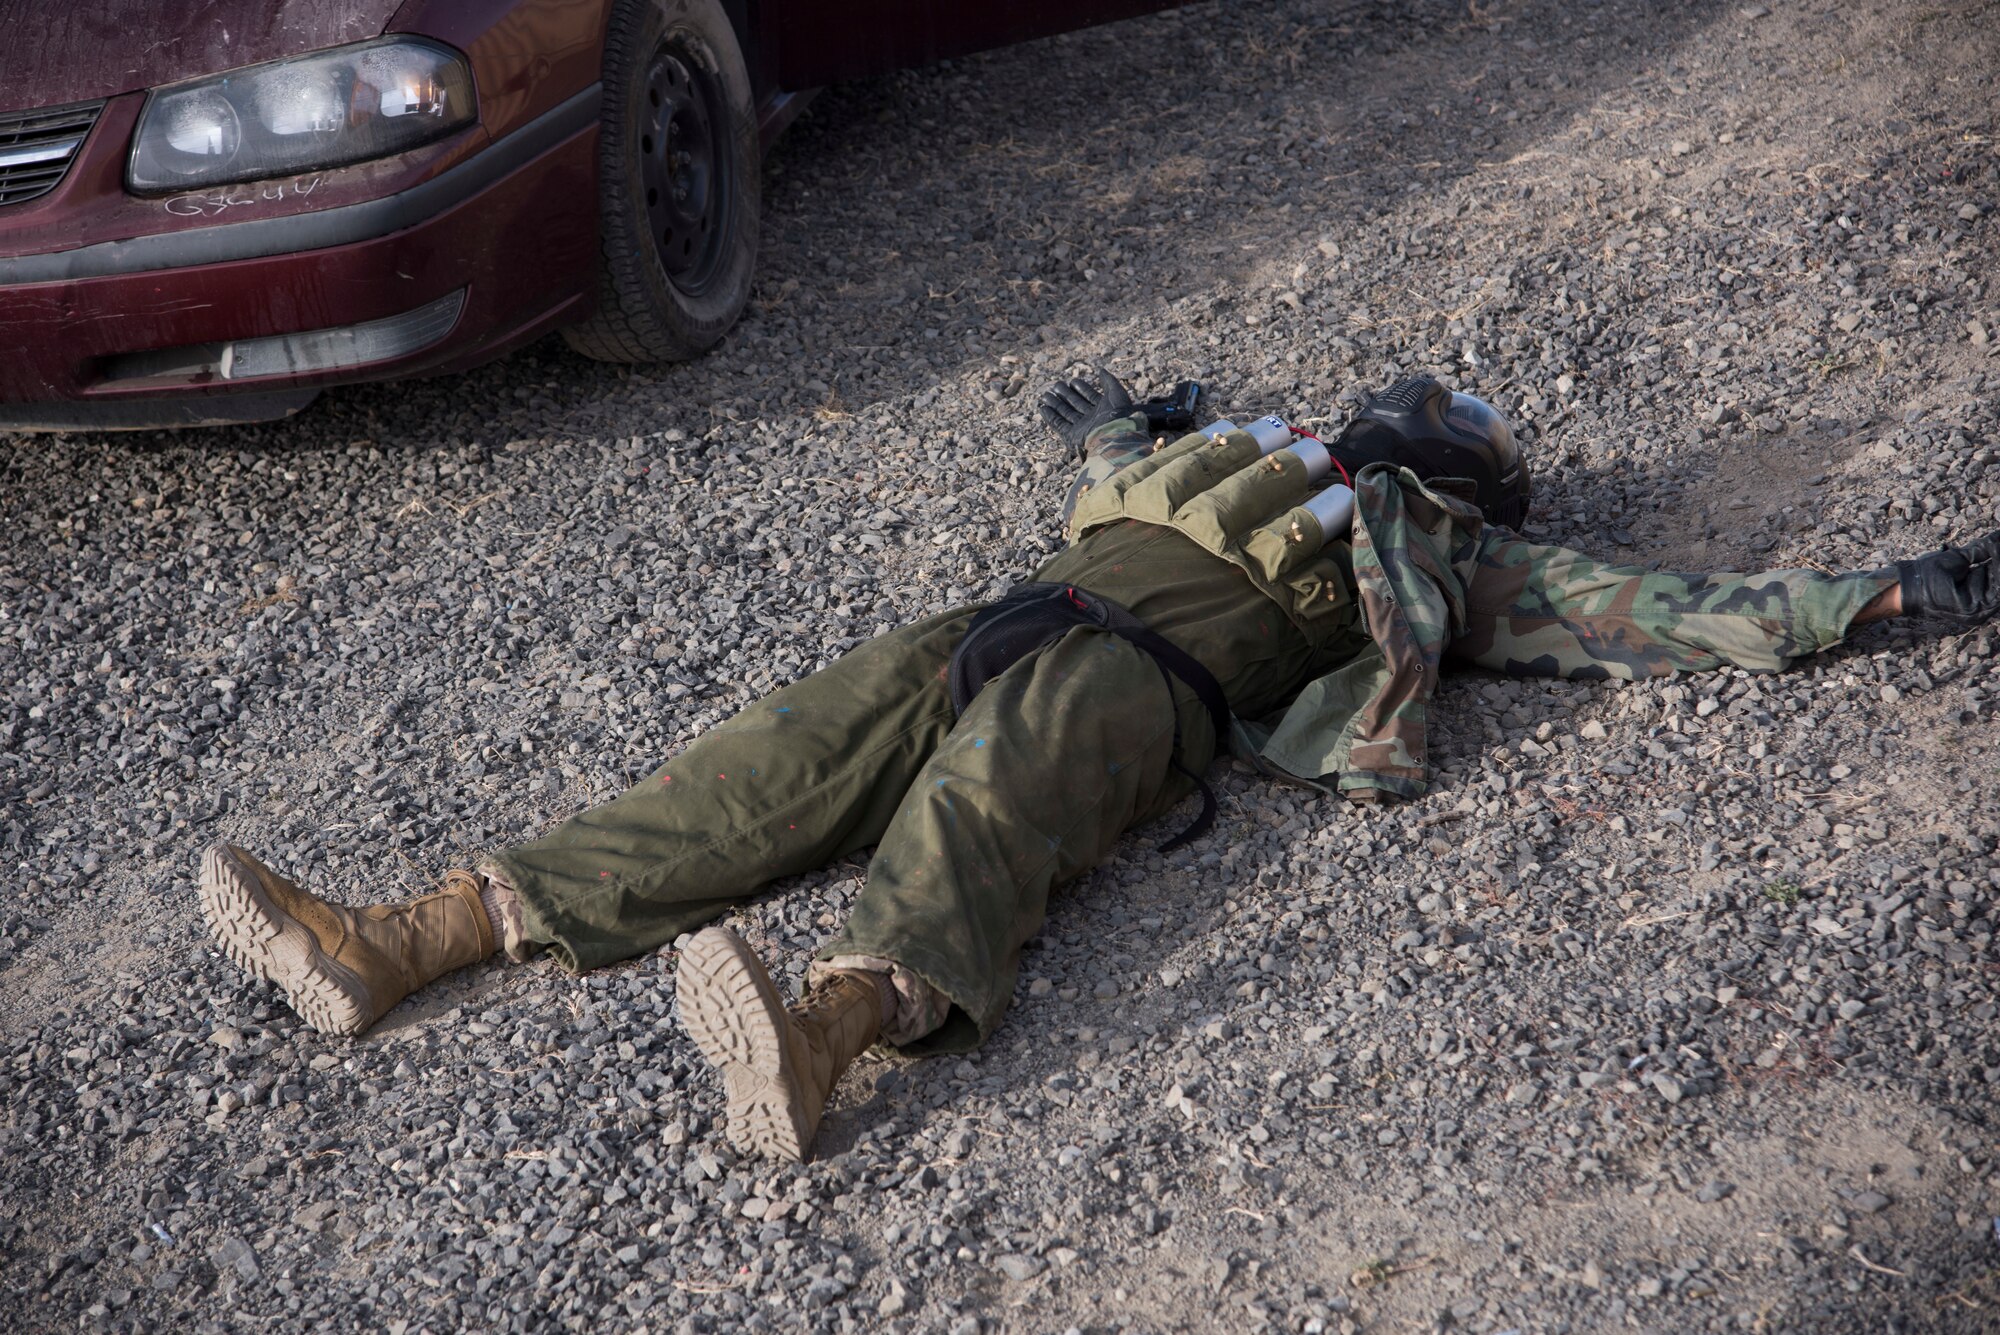 A role-player plays dead during a 92nd Security Forces Squadron high-risk situation training exercise at Fairchild Air Force Base, Washington, Oct. 15, 2018. Role-players changed tactics and responses to keep the training Defenders on their toes, forcing them to think on-the-fly to achieve the best possible outcome if routine encounters turn deadly. (U.S. Air Force photo/ Senior Airman Ryan Lackey)